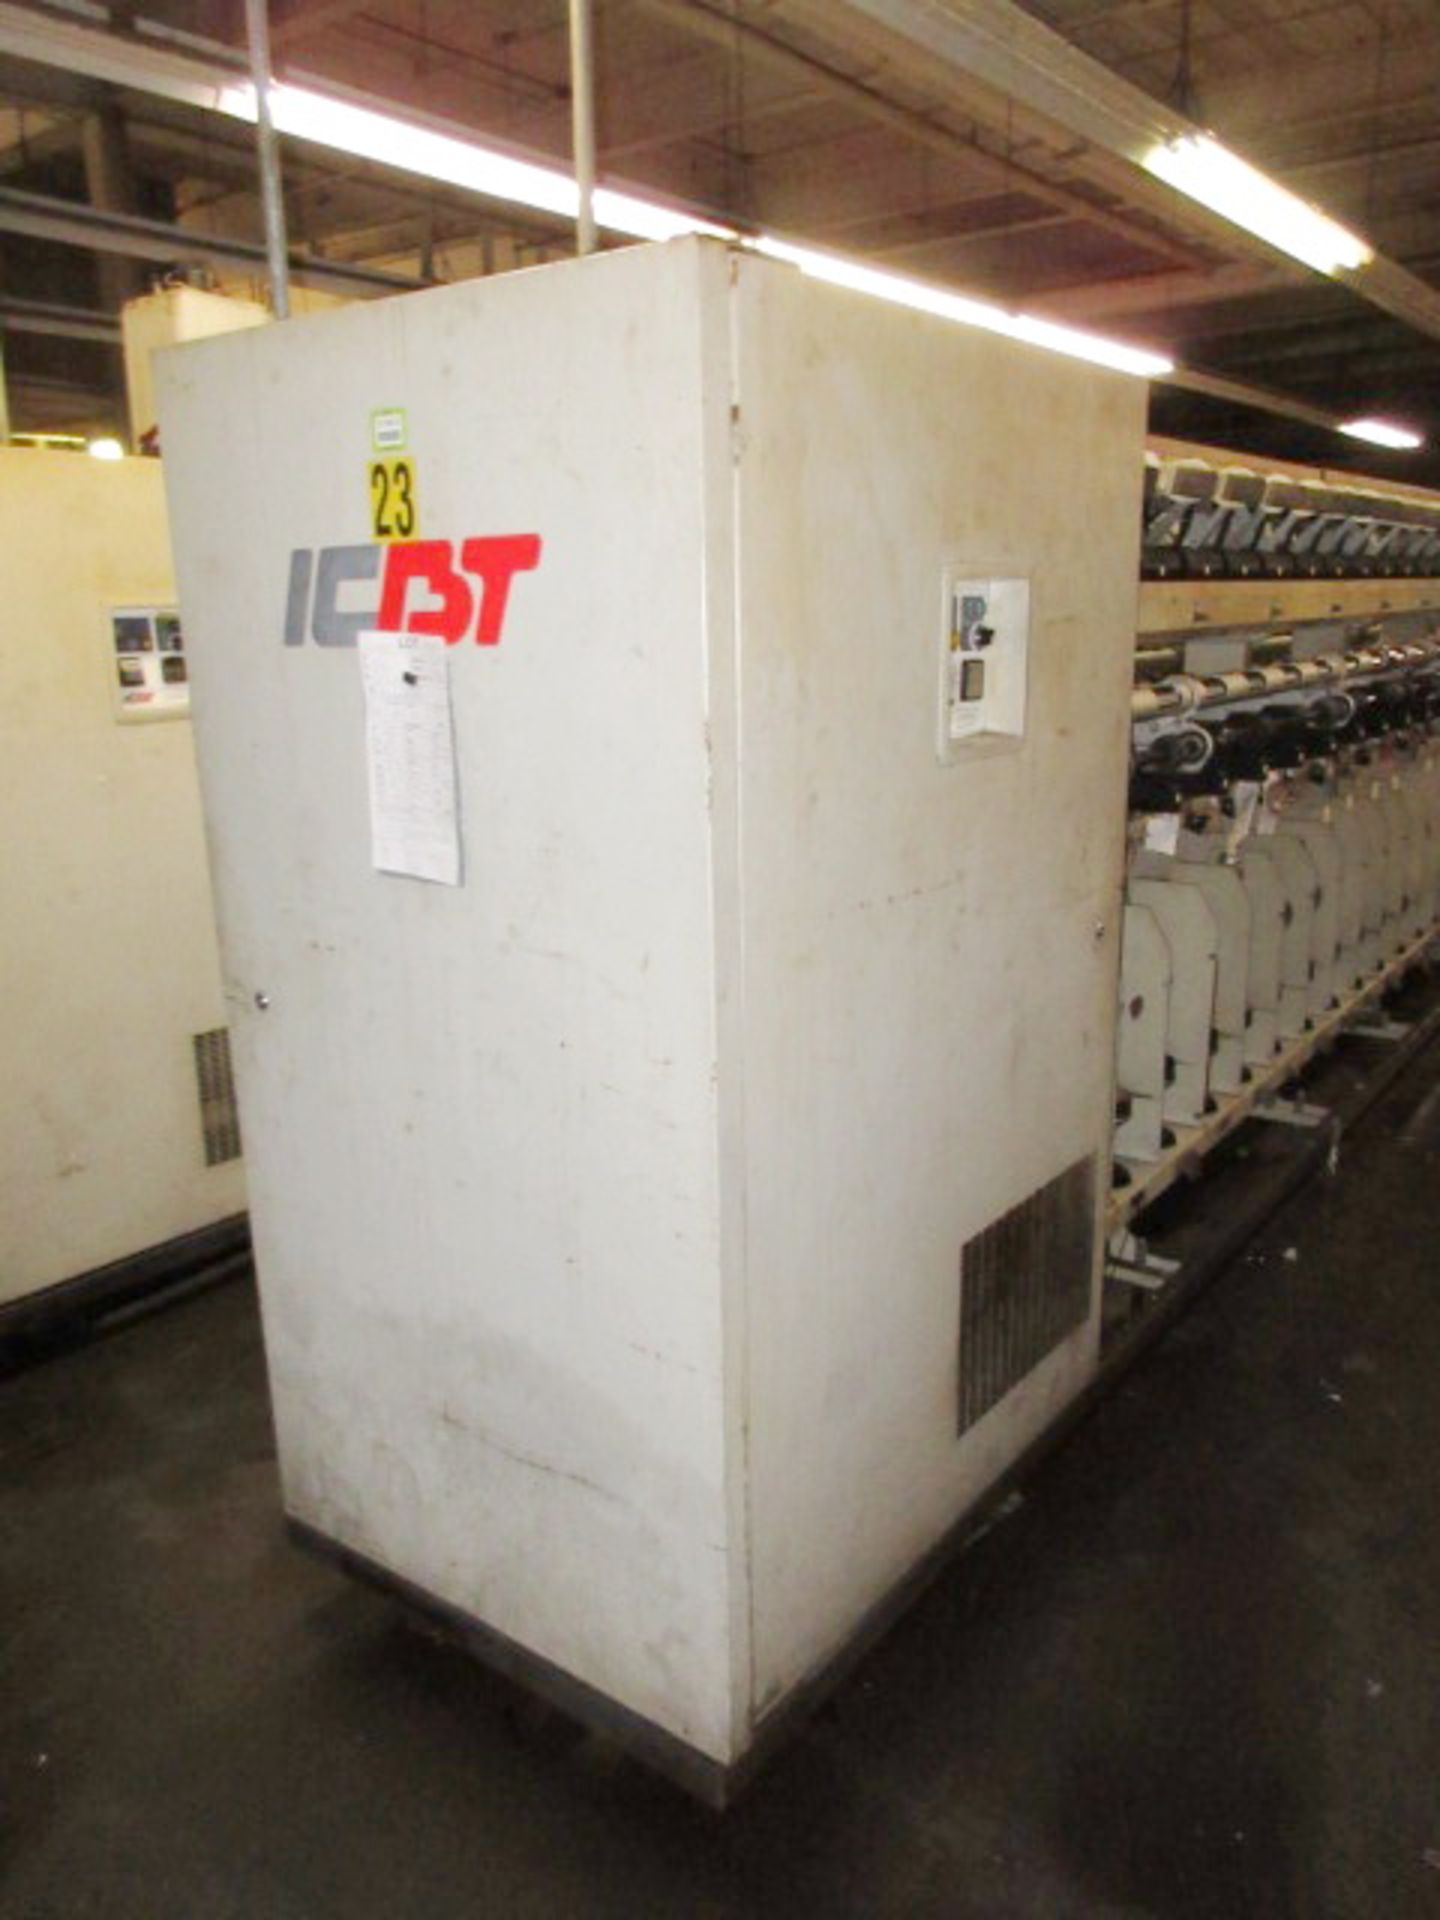 ICBT DT360 2X1 Twister, (1995), 144 spindles, can run with oil trough, said to be in running - Image 3 of 9